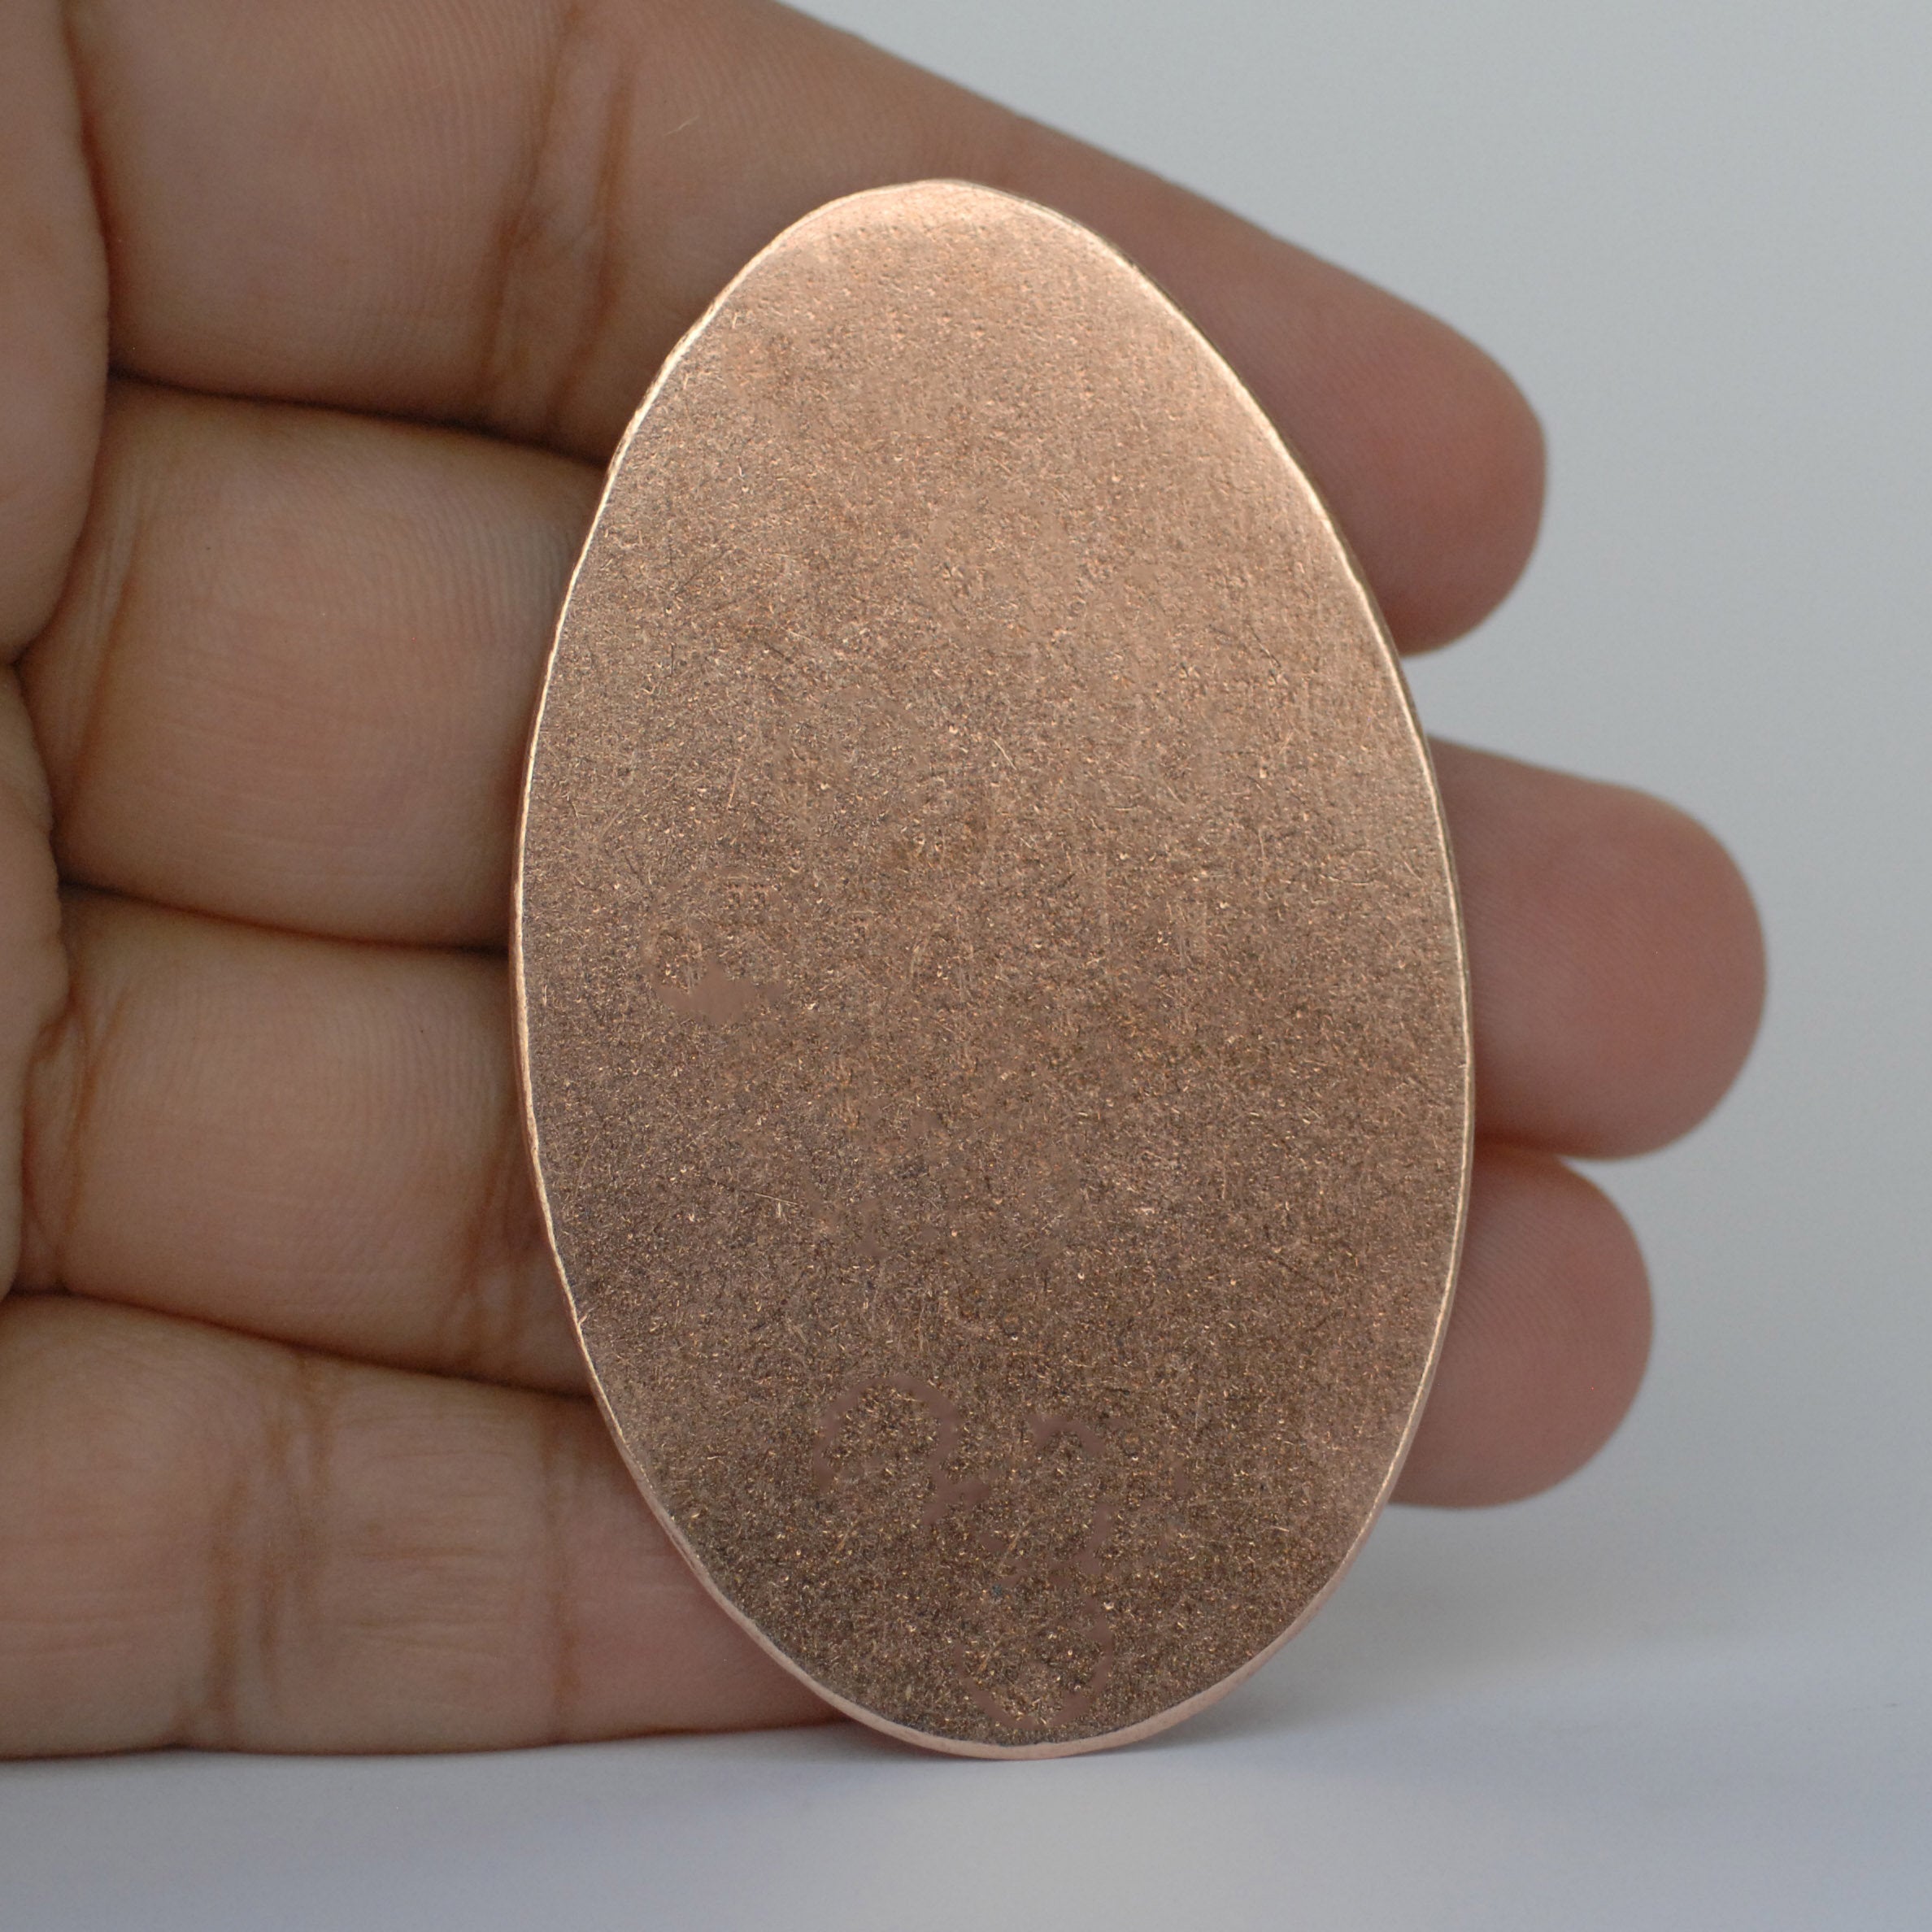 Large oval shapes, metal blanks for making jewelry 56mm x 34mm copper, brass, bronze, nickel silver 24g 22g